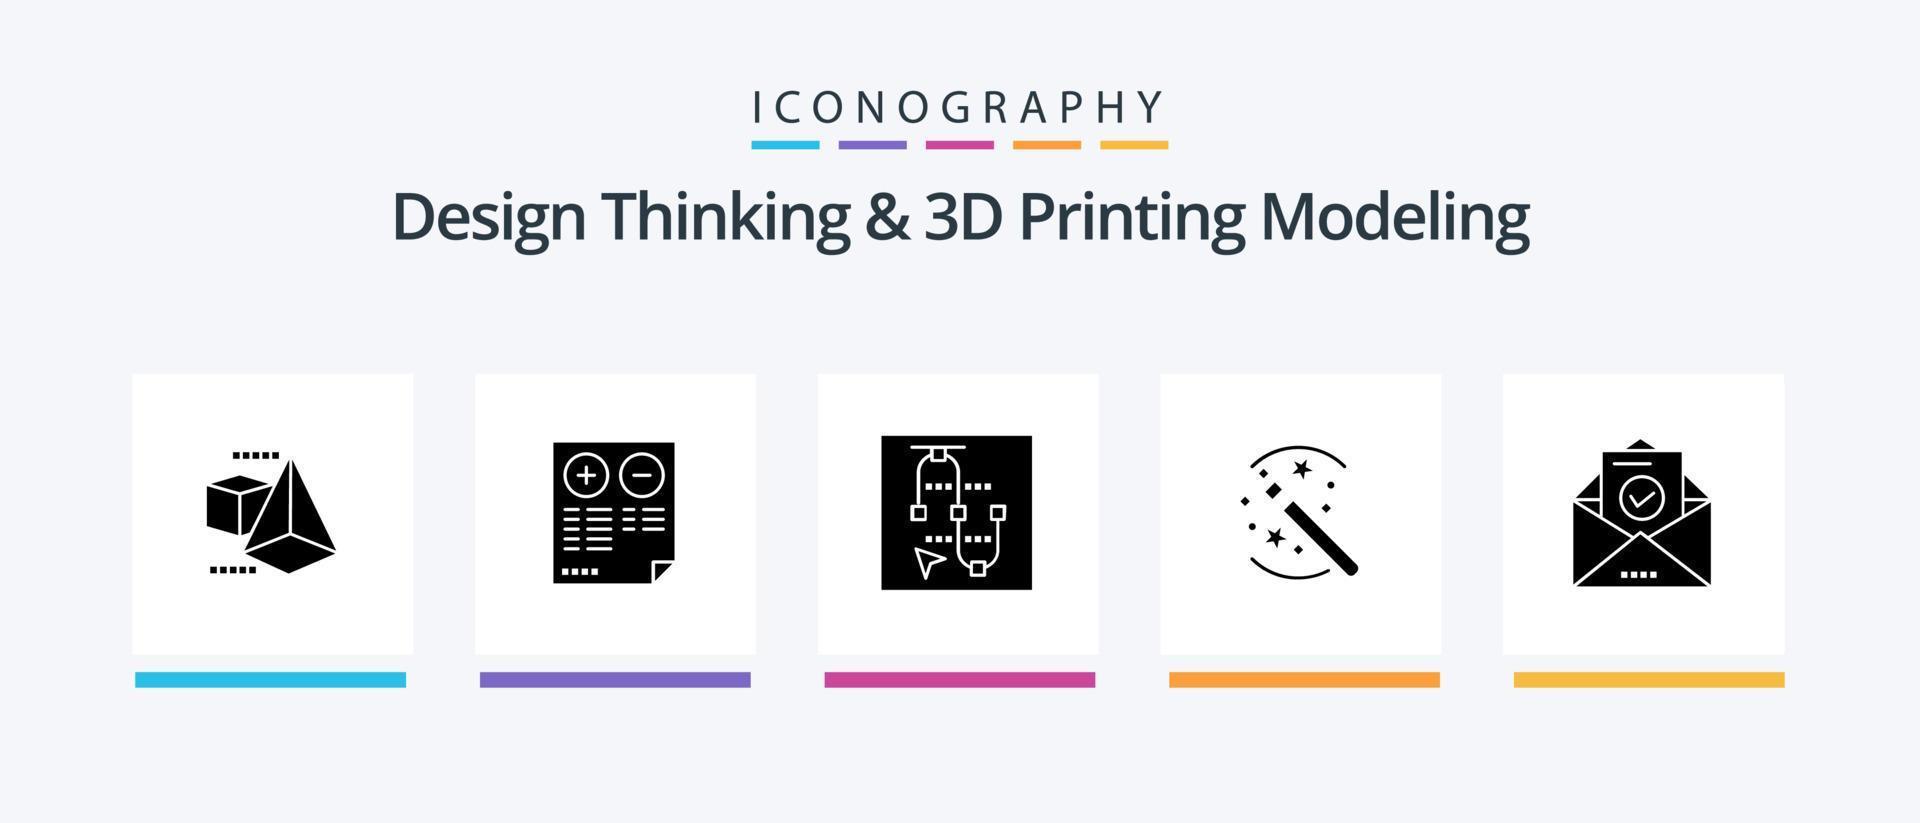 Design Thinking und D Printing Modeling Glyph 5 Icon Pack inklusive Mail. Magie. Maus. Lösung. Pfeil. kreatives Symboldesign vektor